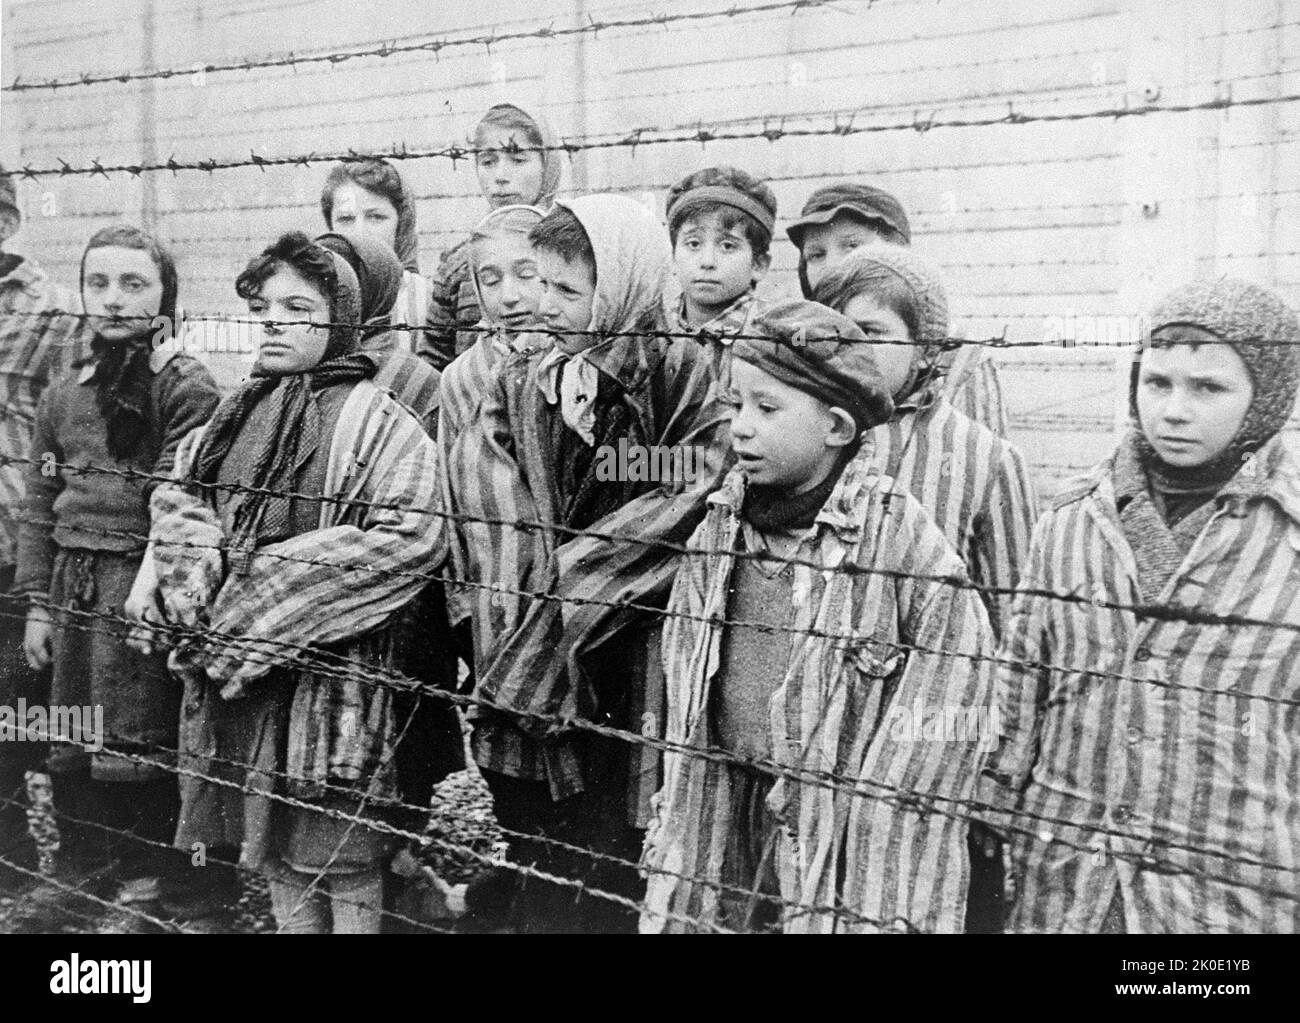 Still photograph from the Soviet Film of the liberation of Auschwitz, taken by the film unit of the First Ukrainian Front, shot in 1945 by Alexander Voronzow and others in his group. Child survivors of Auschwitz, wearing adult-size prisoner jackets, stand behind a barbed wire fence. Stock Photo